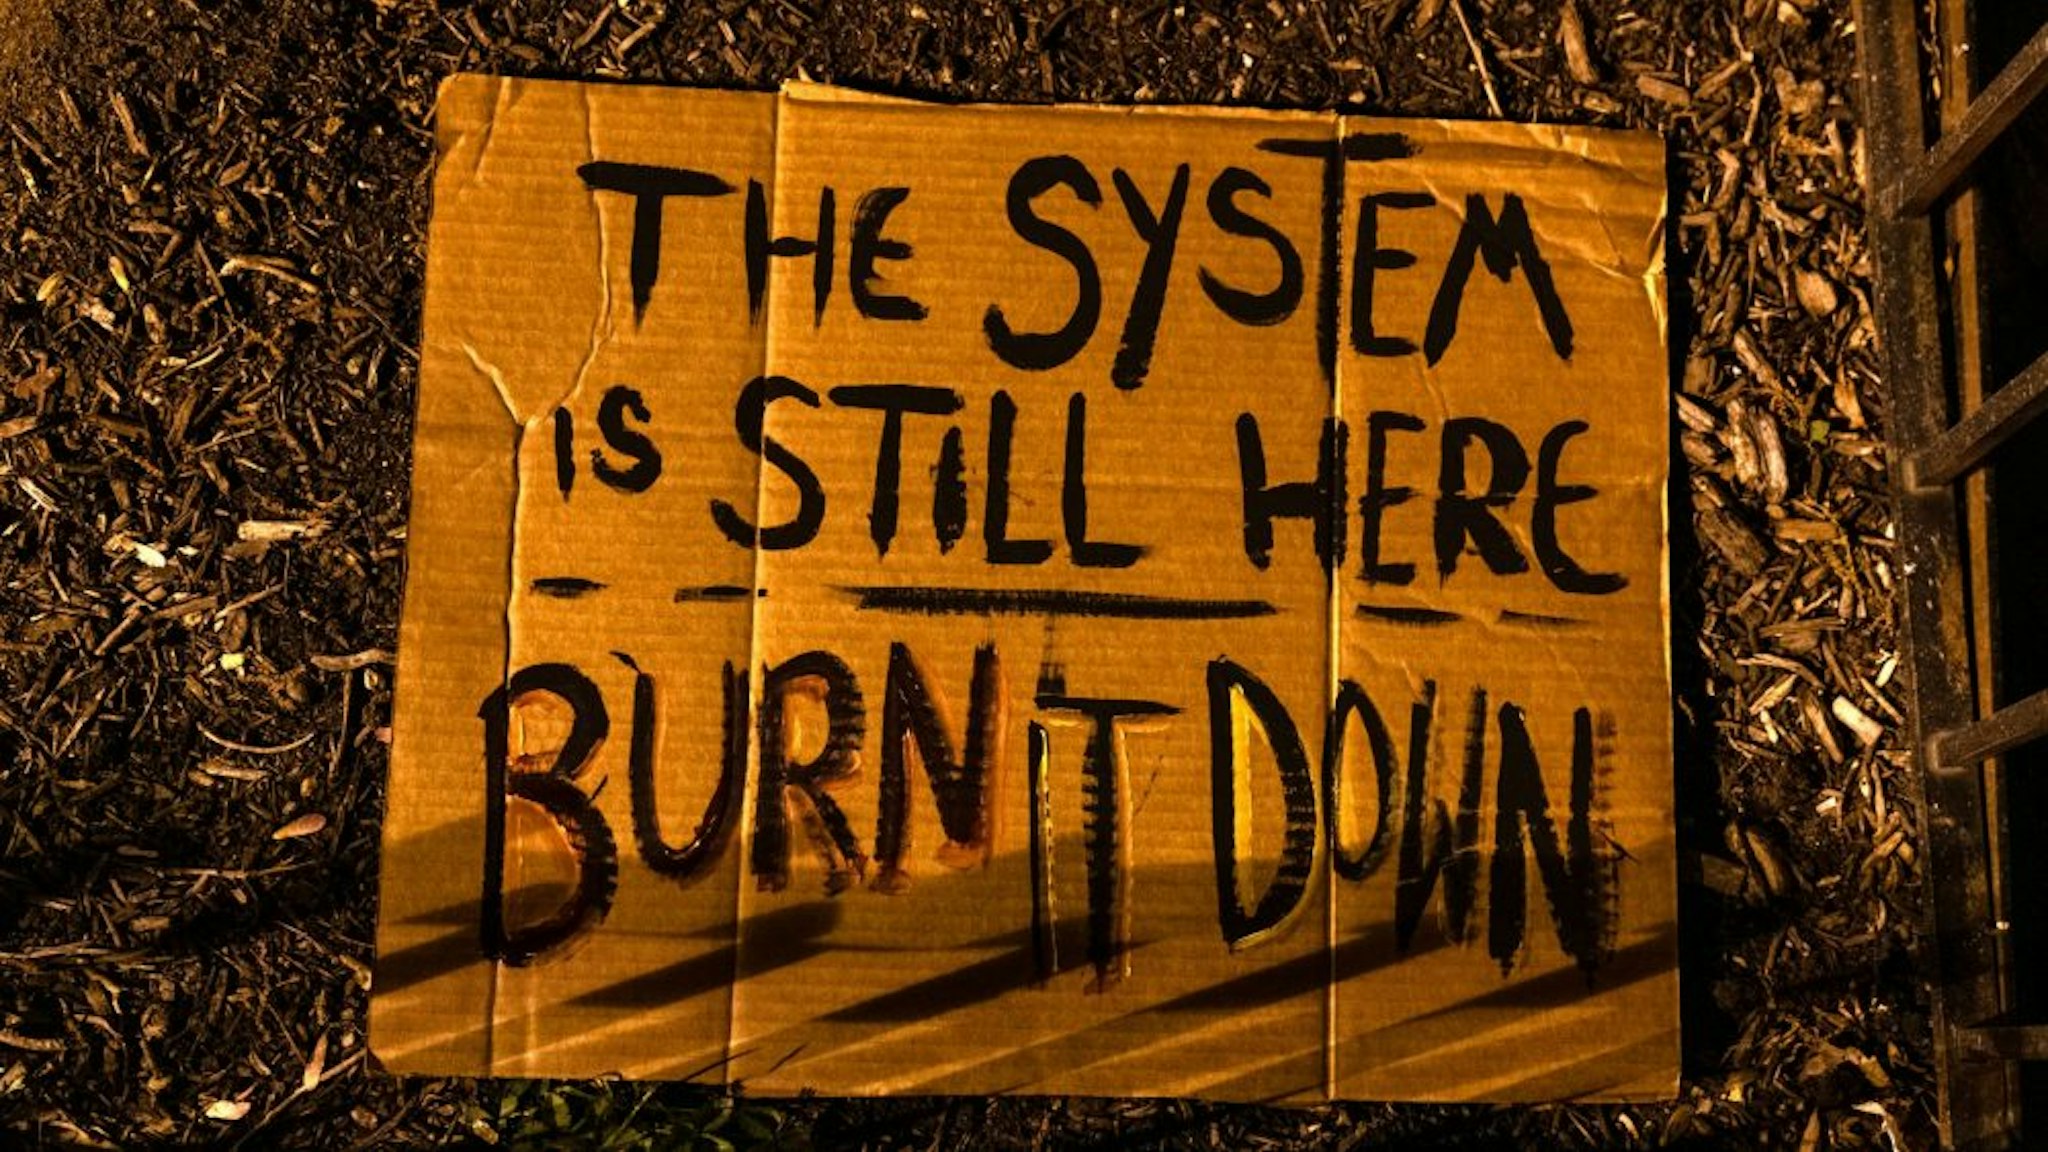 A sign reading "The system is still here. Burn it down." at Black Lives Matter Plaza in Washington, D.C., U.S., on Tuesday, April 20, 2021. Former Minneapolis police officer Derek Chauvin was found guilty of killing George Floyd when he knelt on the mans neck for 9 minutes and 29 seconds, a videotaped death that ignited a summer of rage and the greatest racial reckoning in the U.S. since the 1960s.